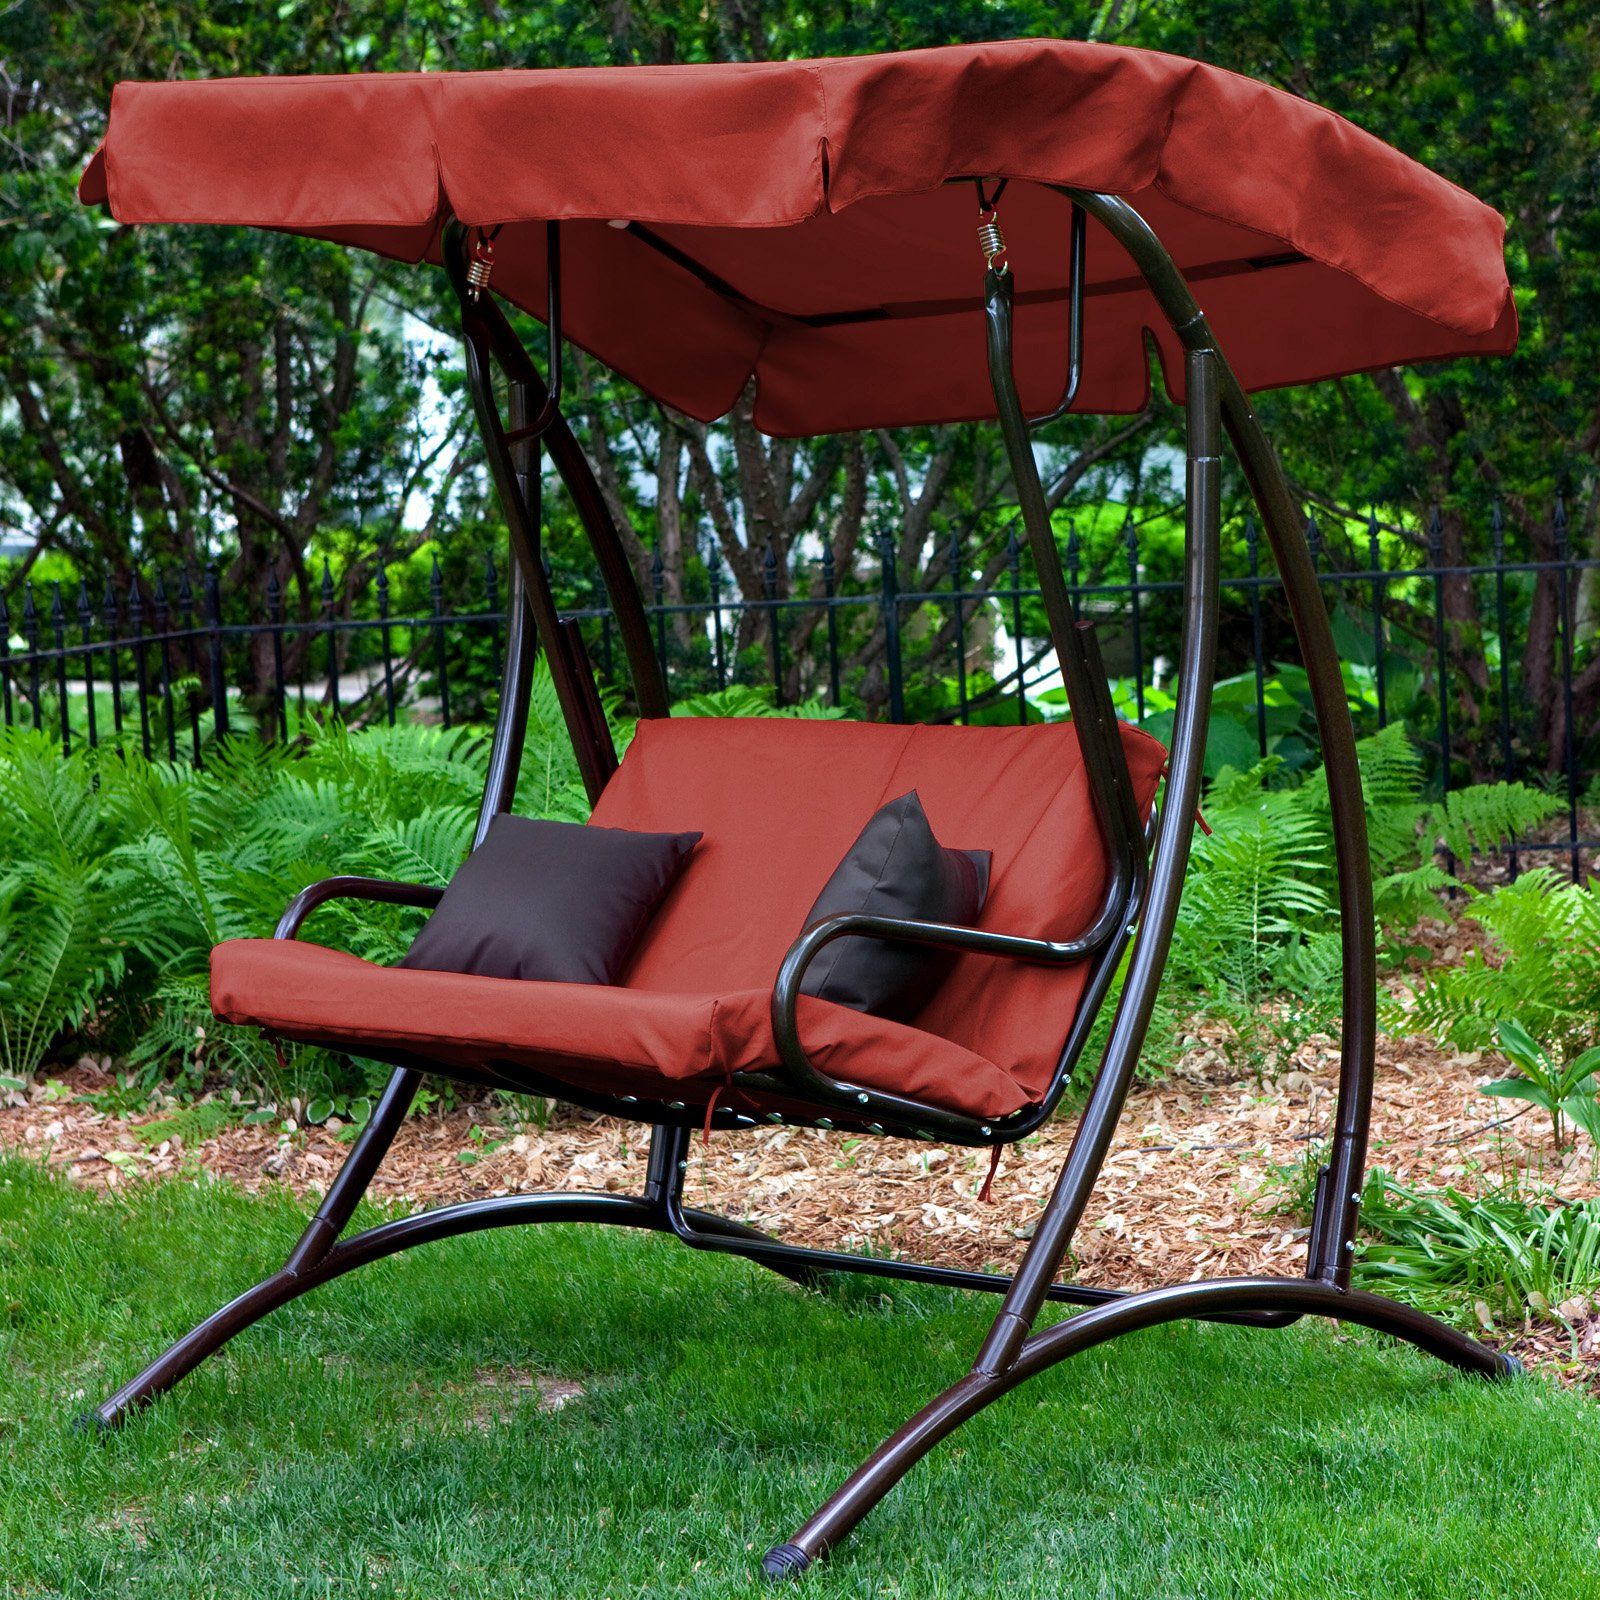 Newest How To Replace A Canopy On An Outdoor Swing (View 17 of 30)